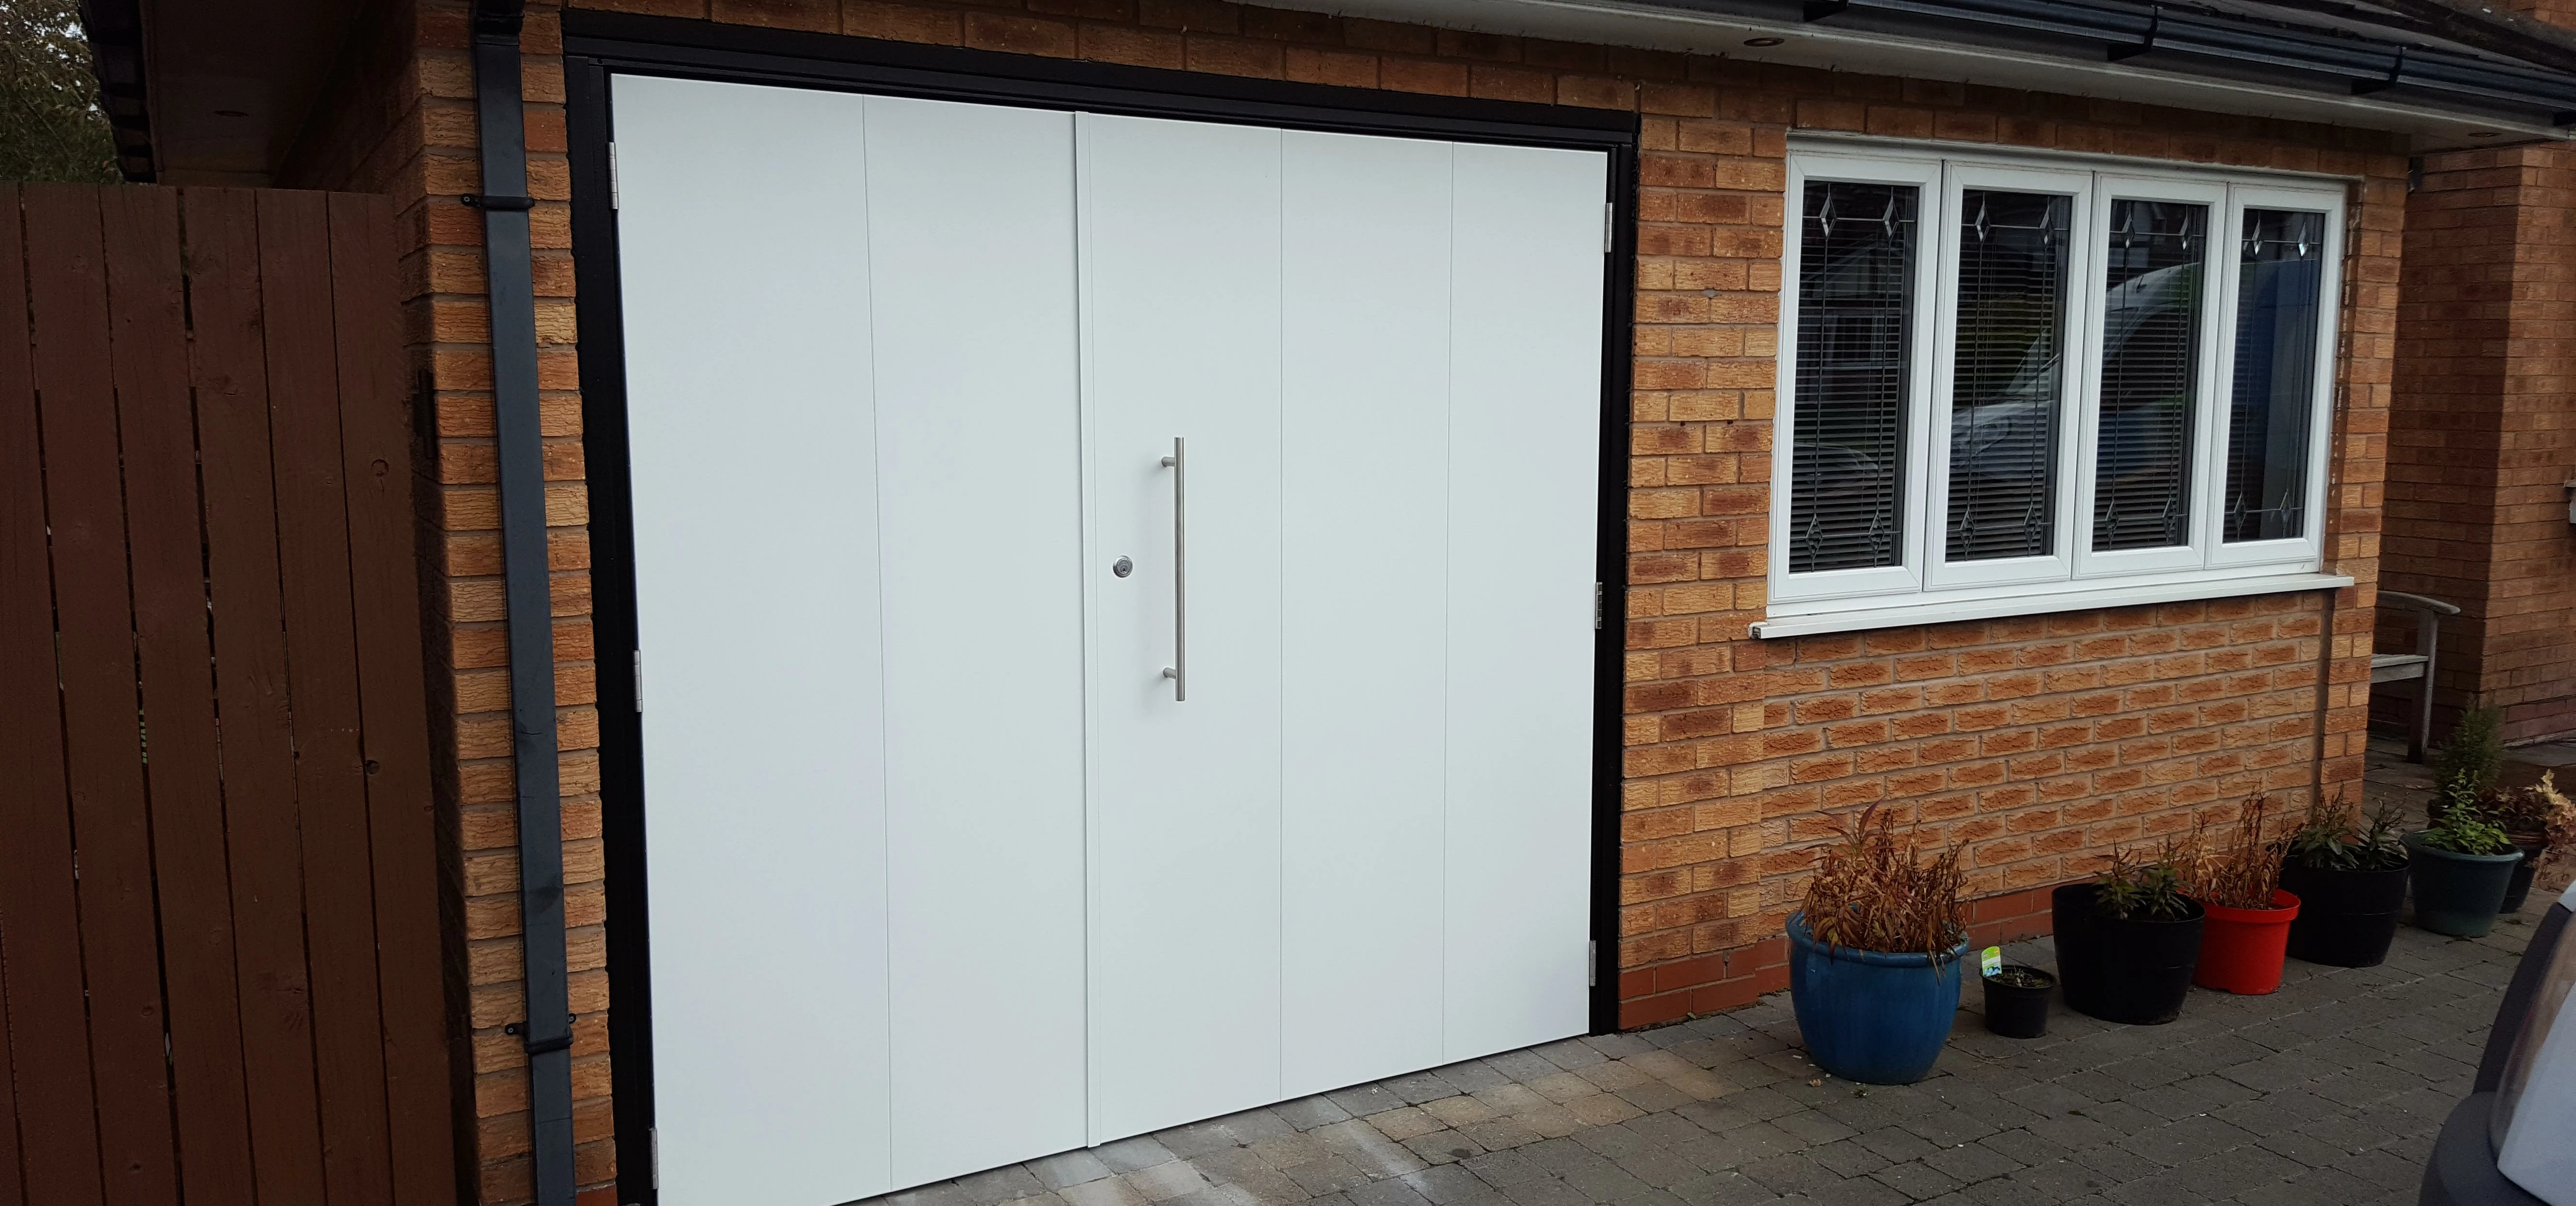 Select Garage Doors are the North West’s number one destination for tailor made garage door solution